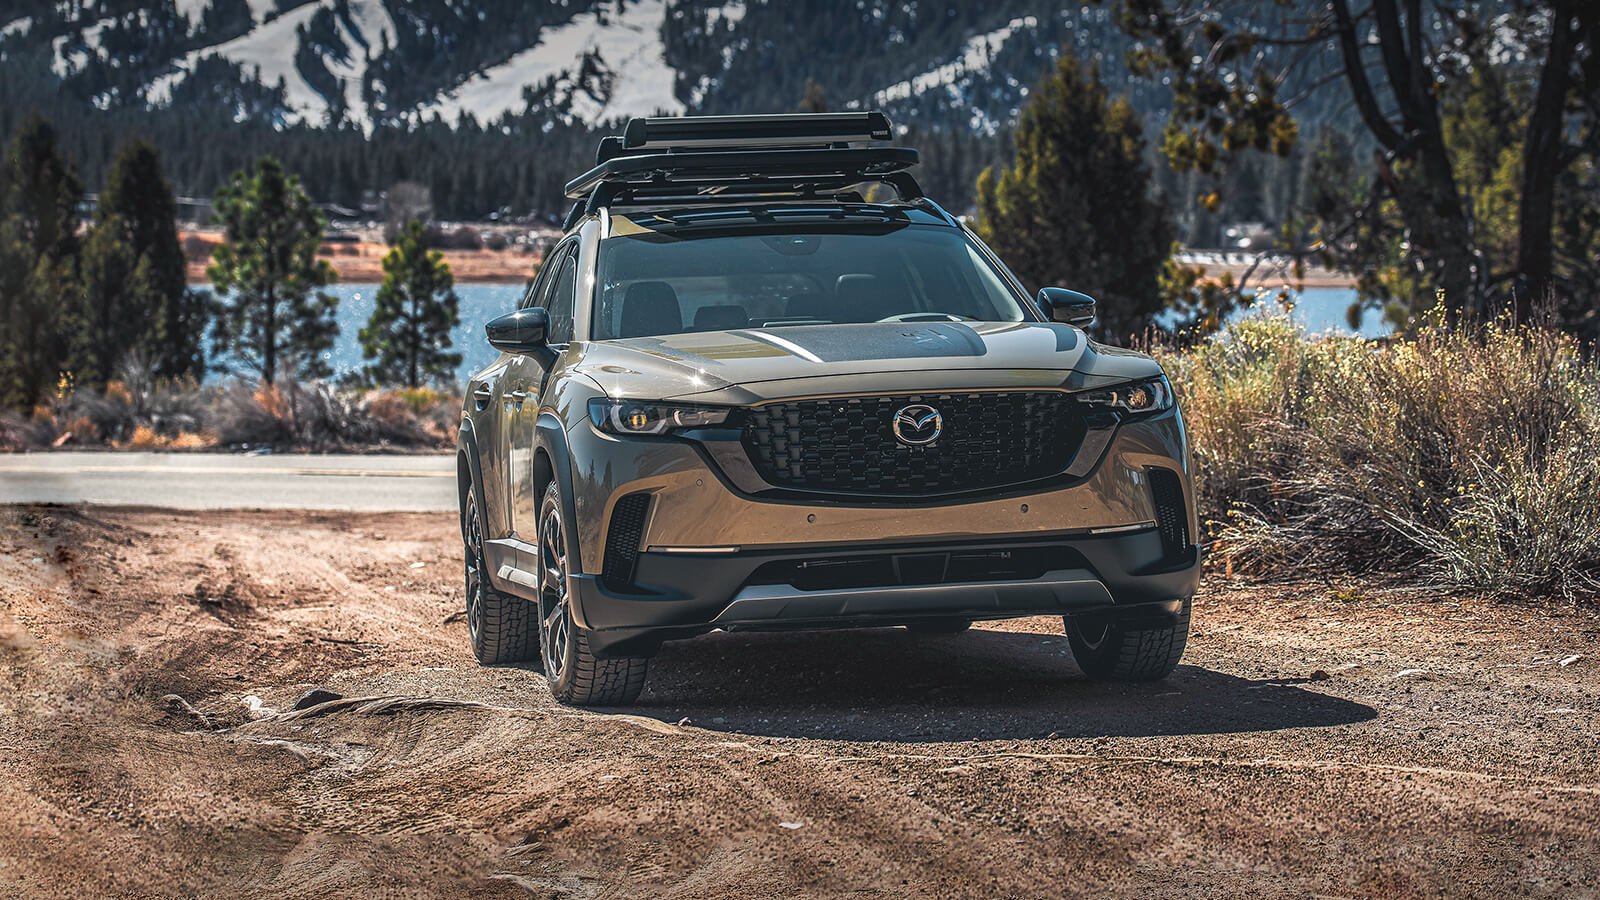 Meridian trim CX-50 drives off a paved road and onto a craggy dirt path.